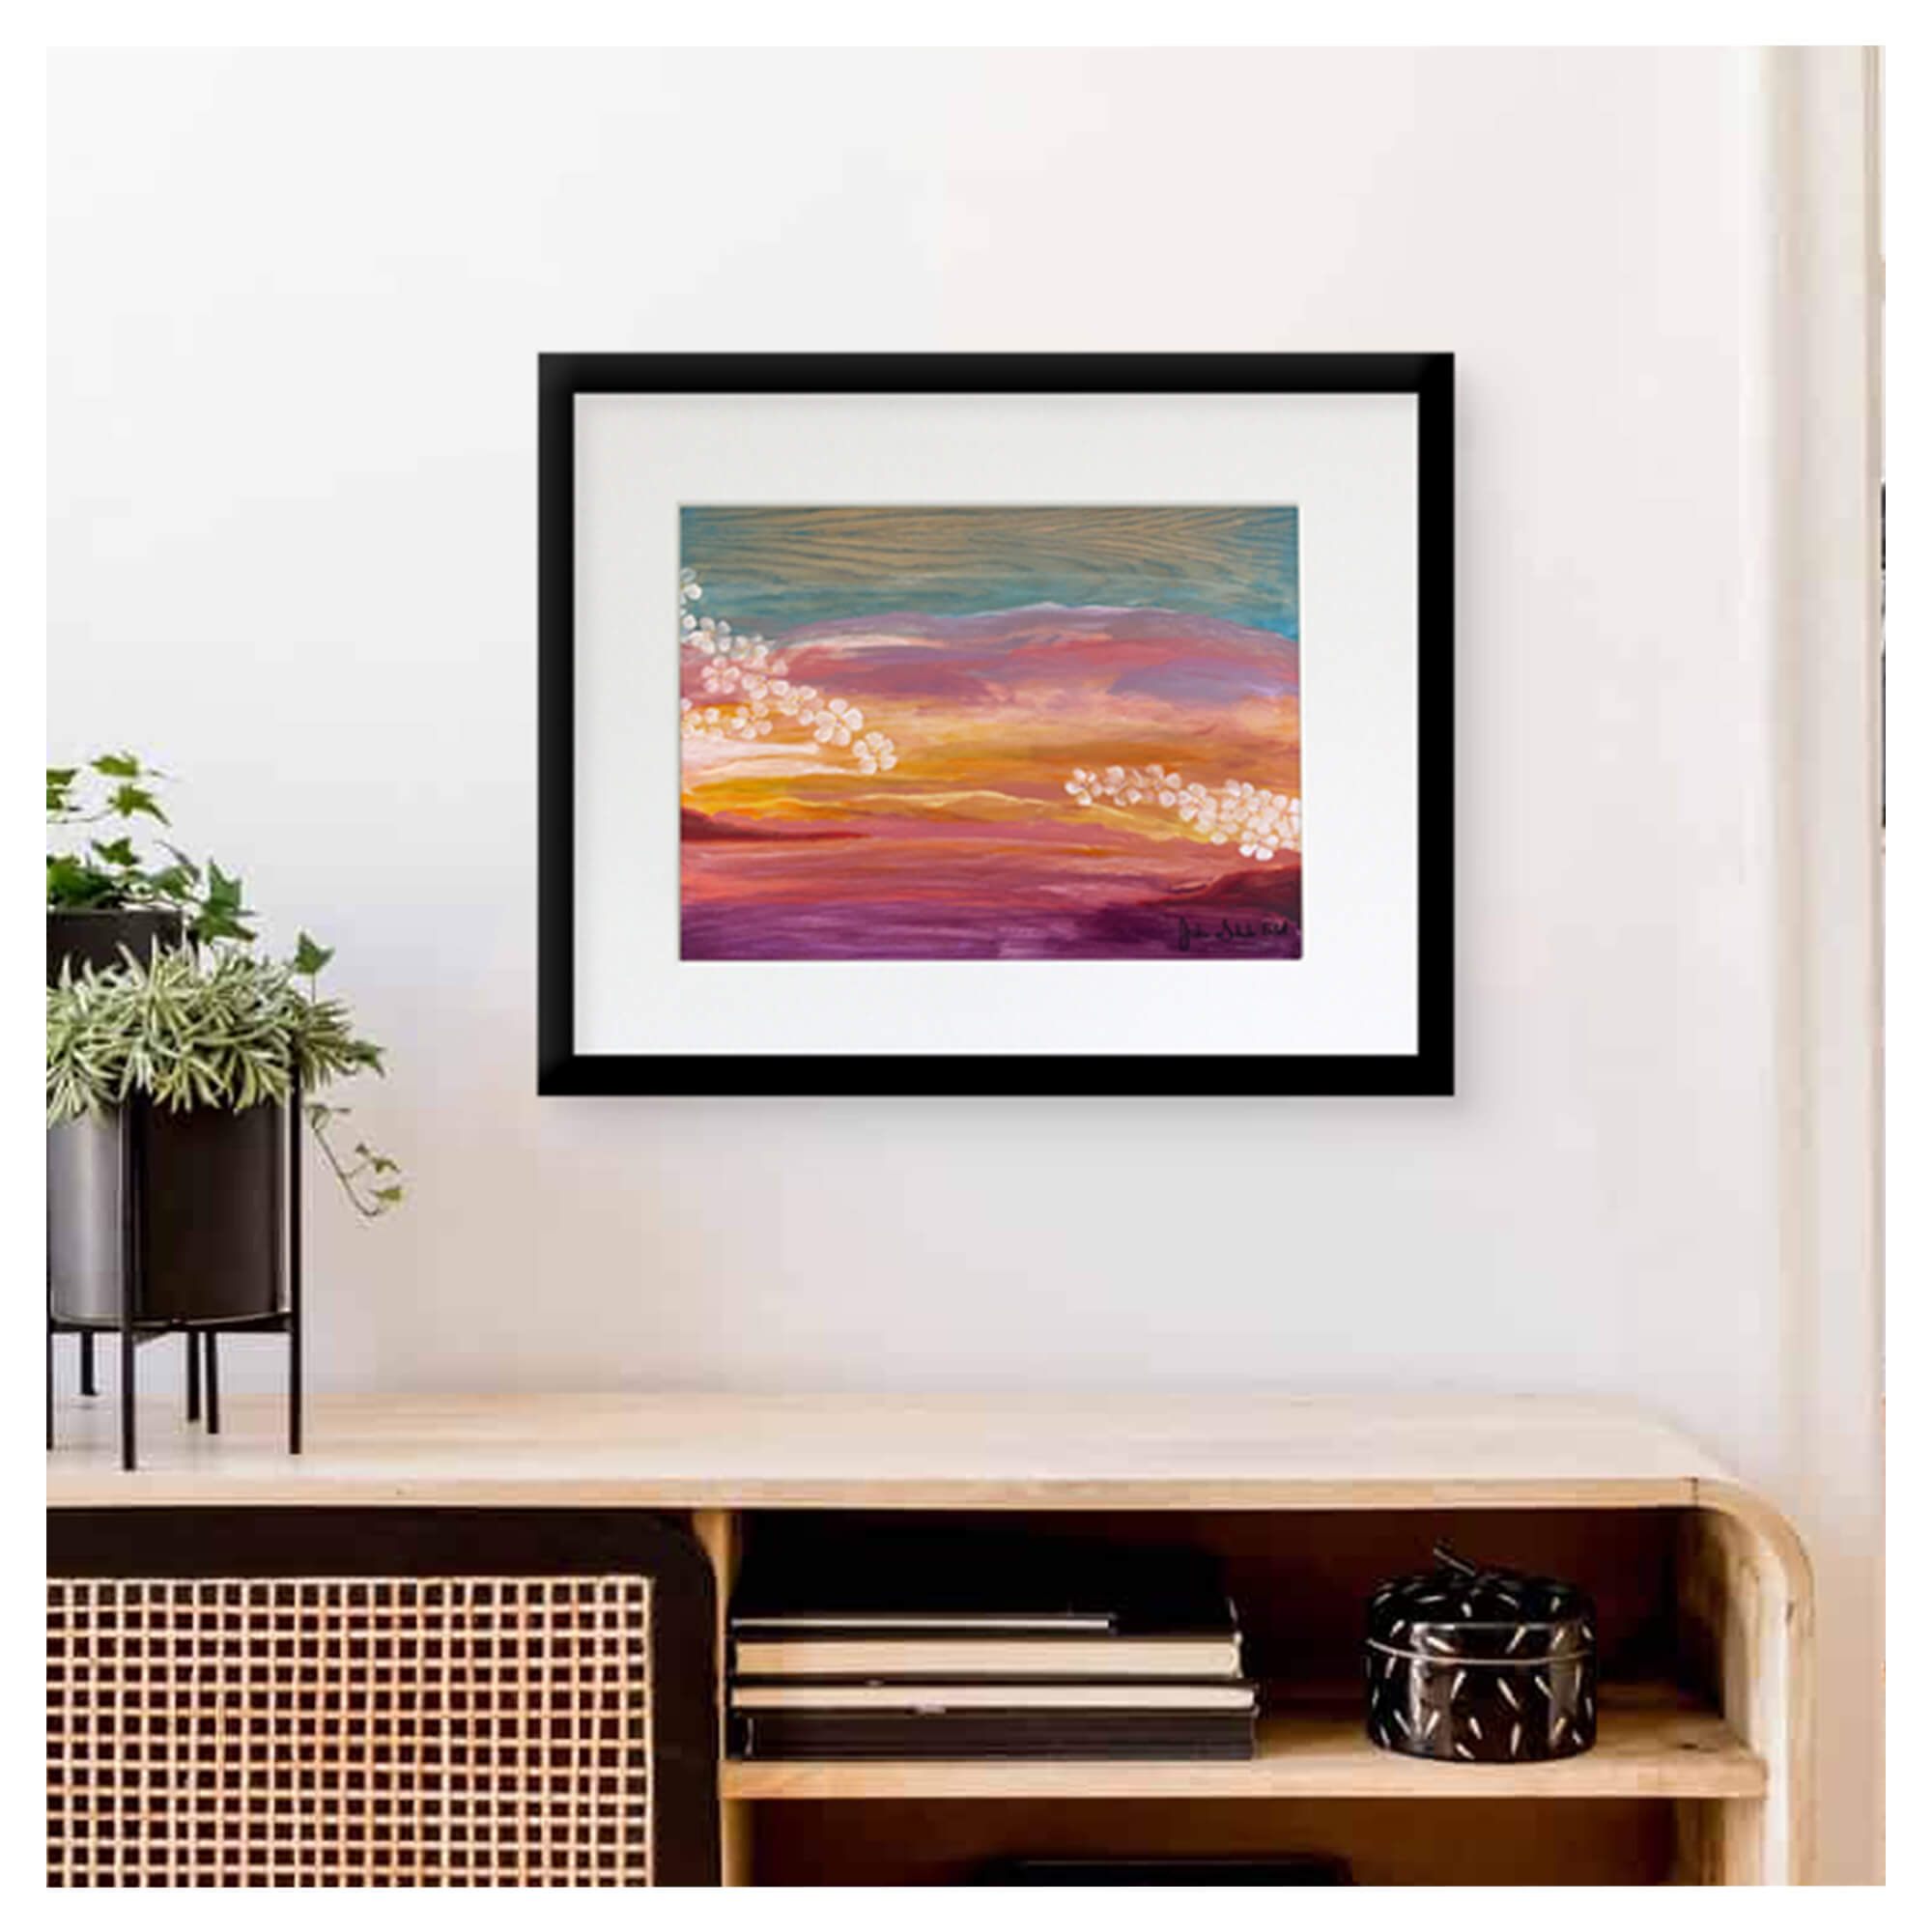 A framed matted art print featuring a vibrant colorful sunset and plumeria flowers by Hawaii artist Jackie Eitel